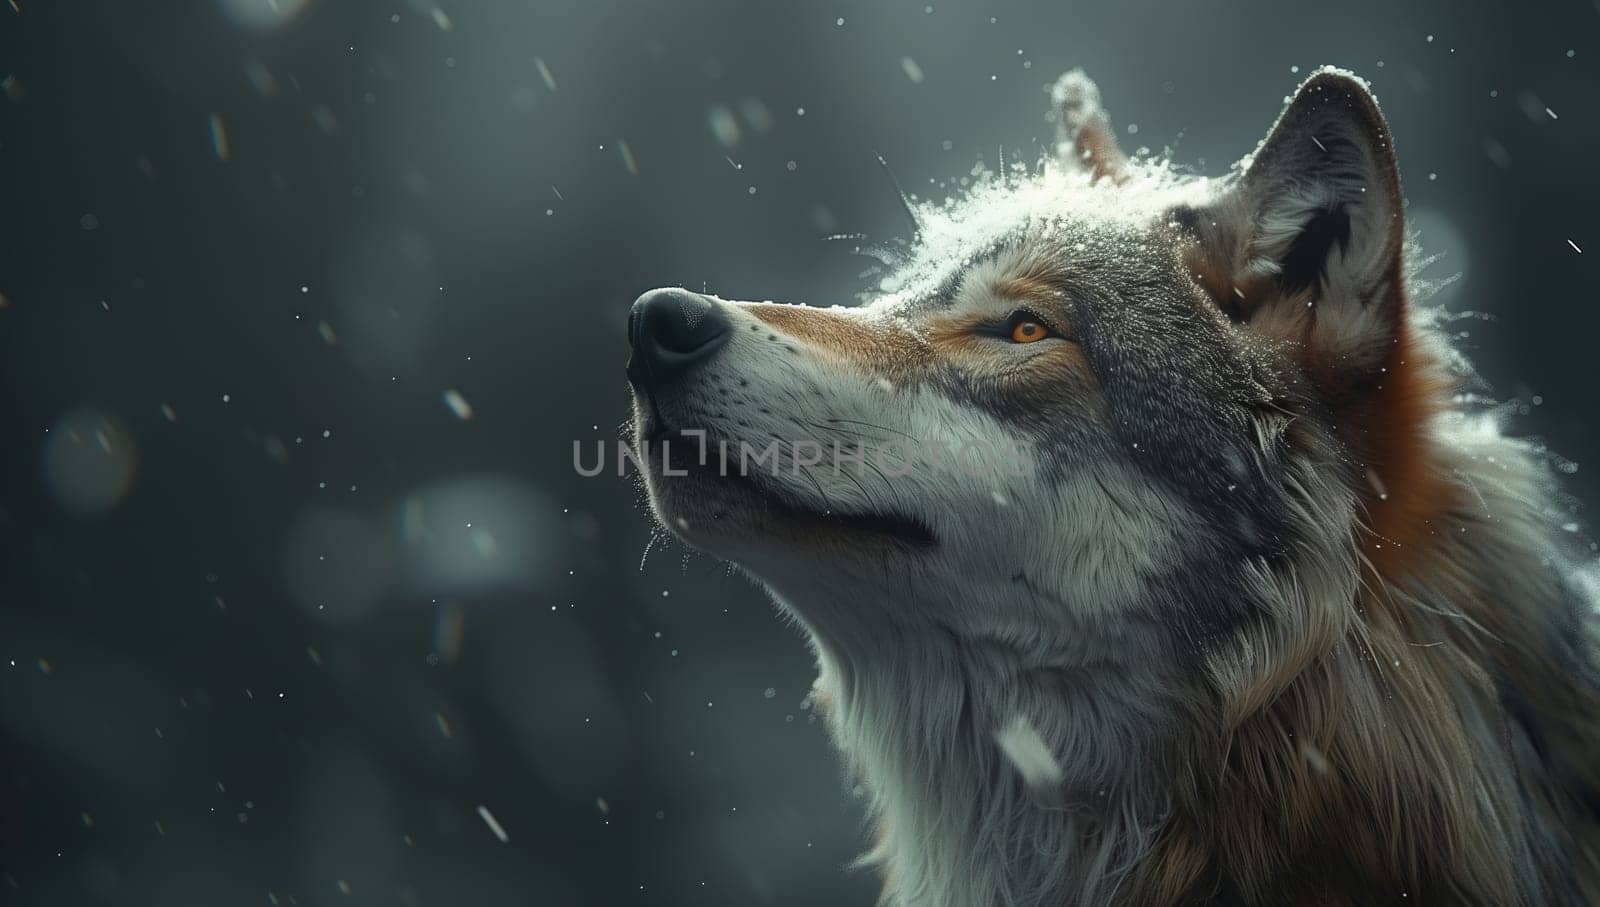 A carnivorous terrestrial animal, resembling ancient dog breeds, the wolf gazes up at the sky in the snowy darkness. Its fur glistens under the soft glow of the moonlight